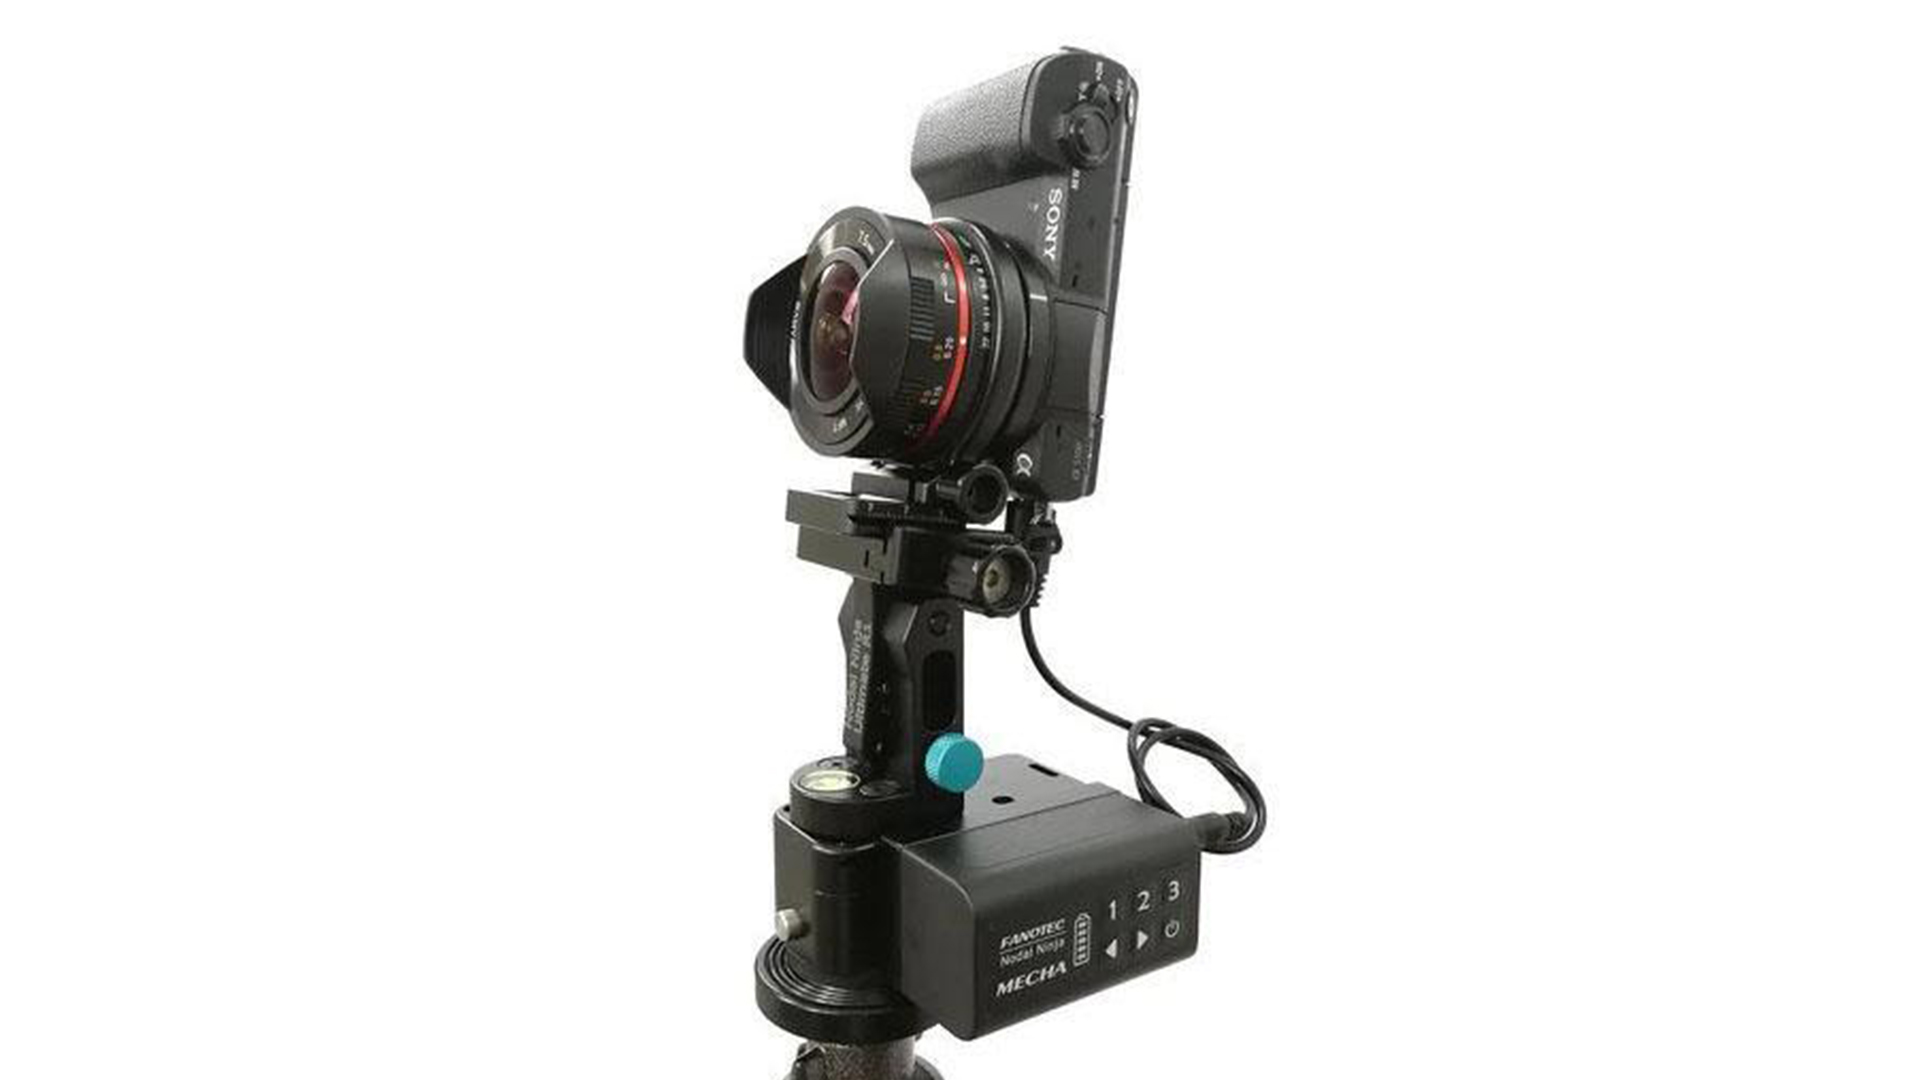 dsl camera with a wide angle lens for virtual tours